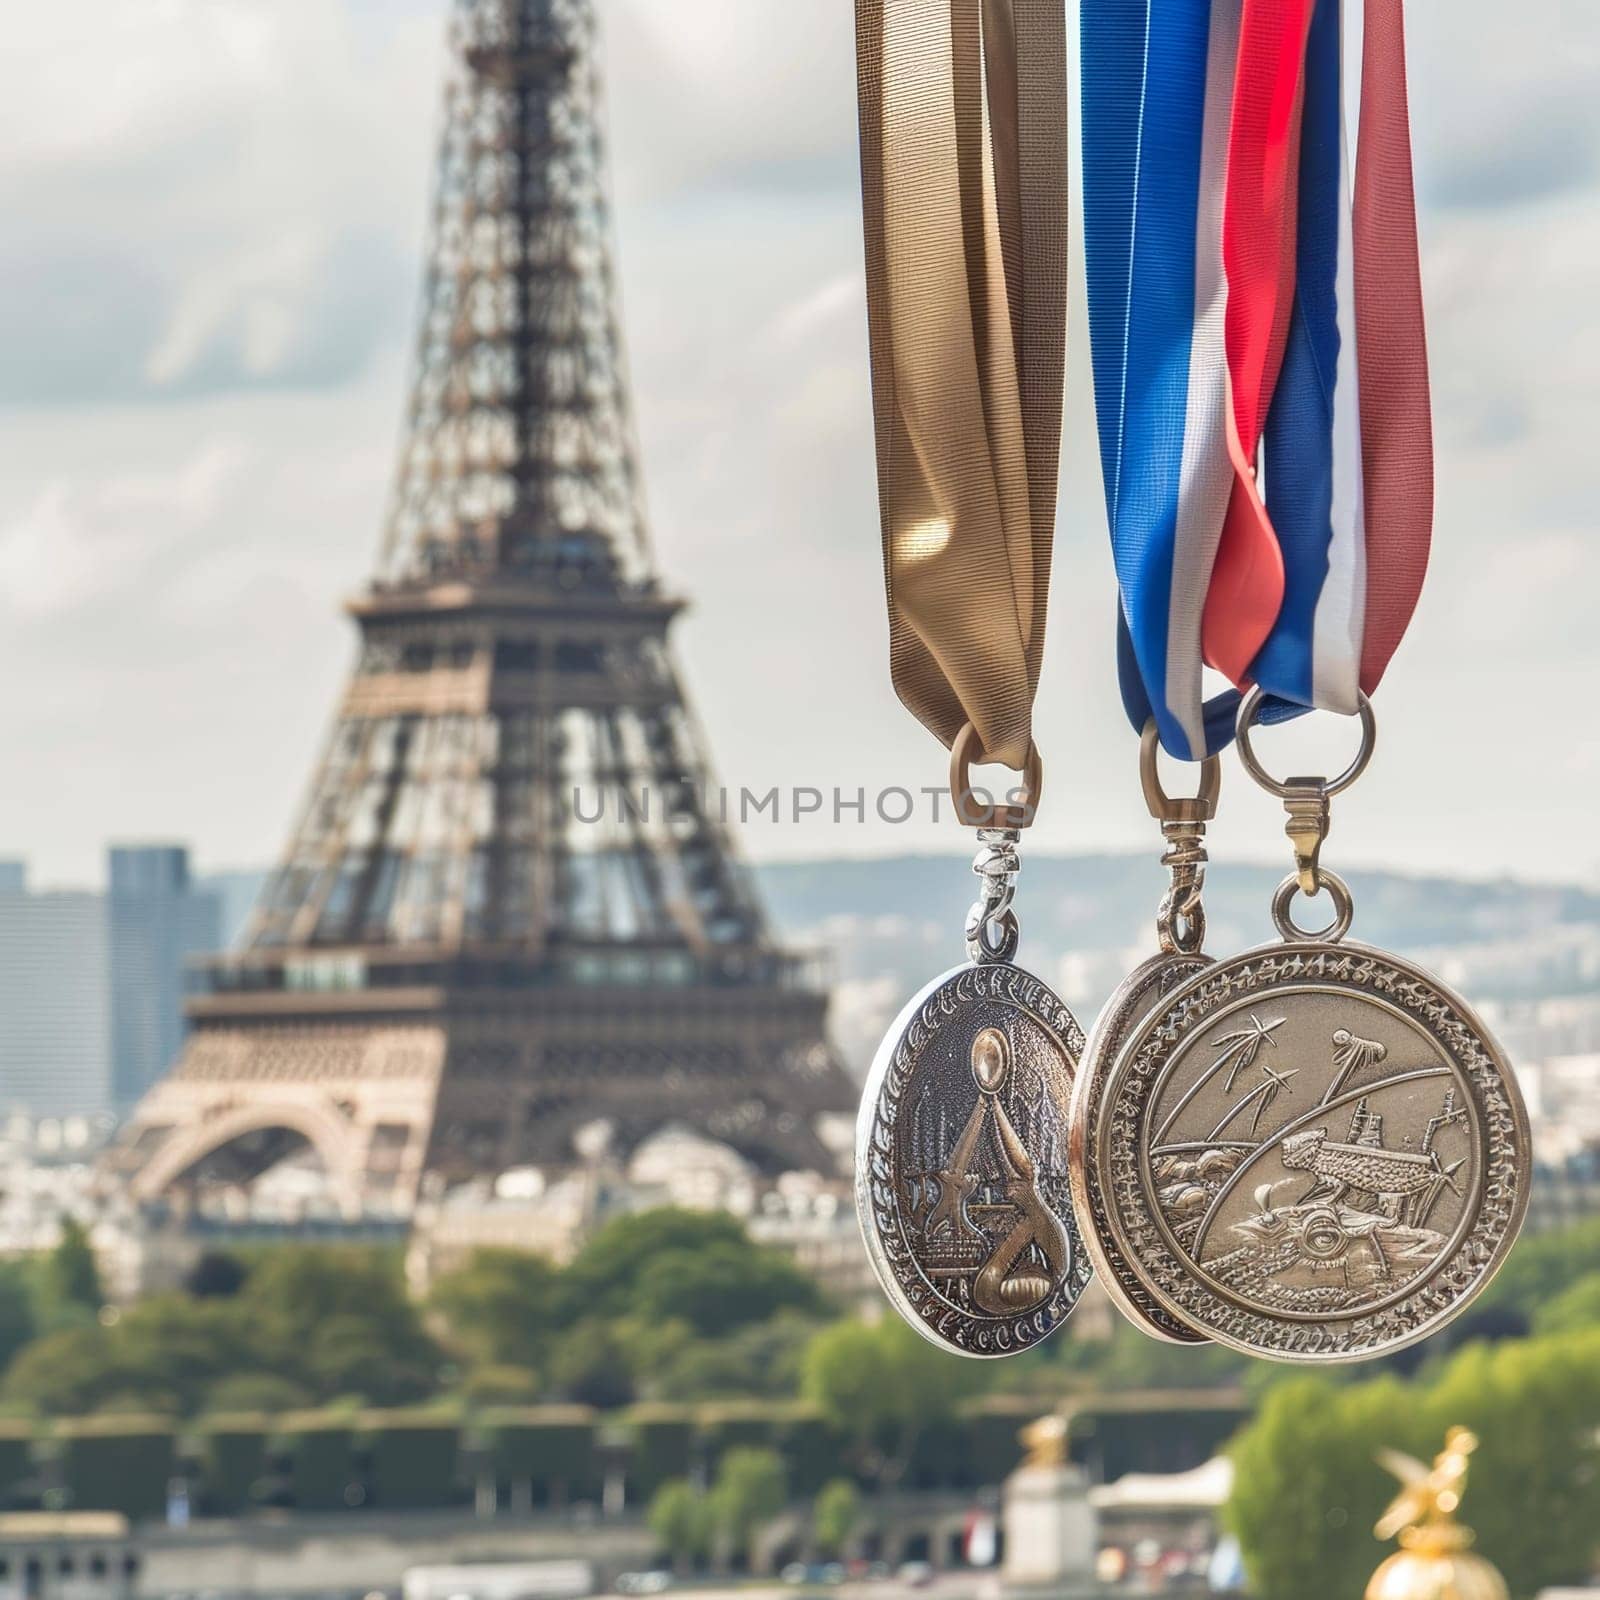 A pair of commemorative medals with ribbons displayed against the Eiffel Towers backdrop on a sunny day